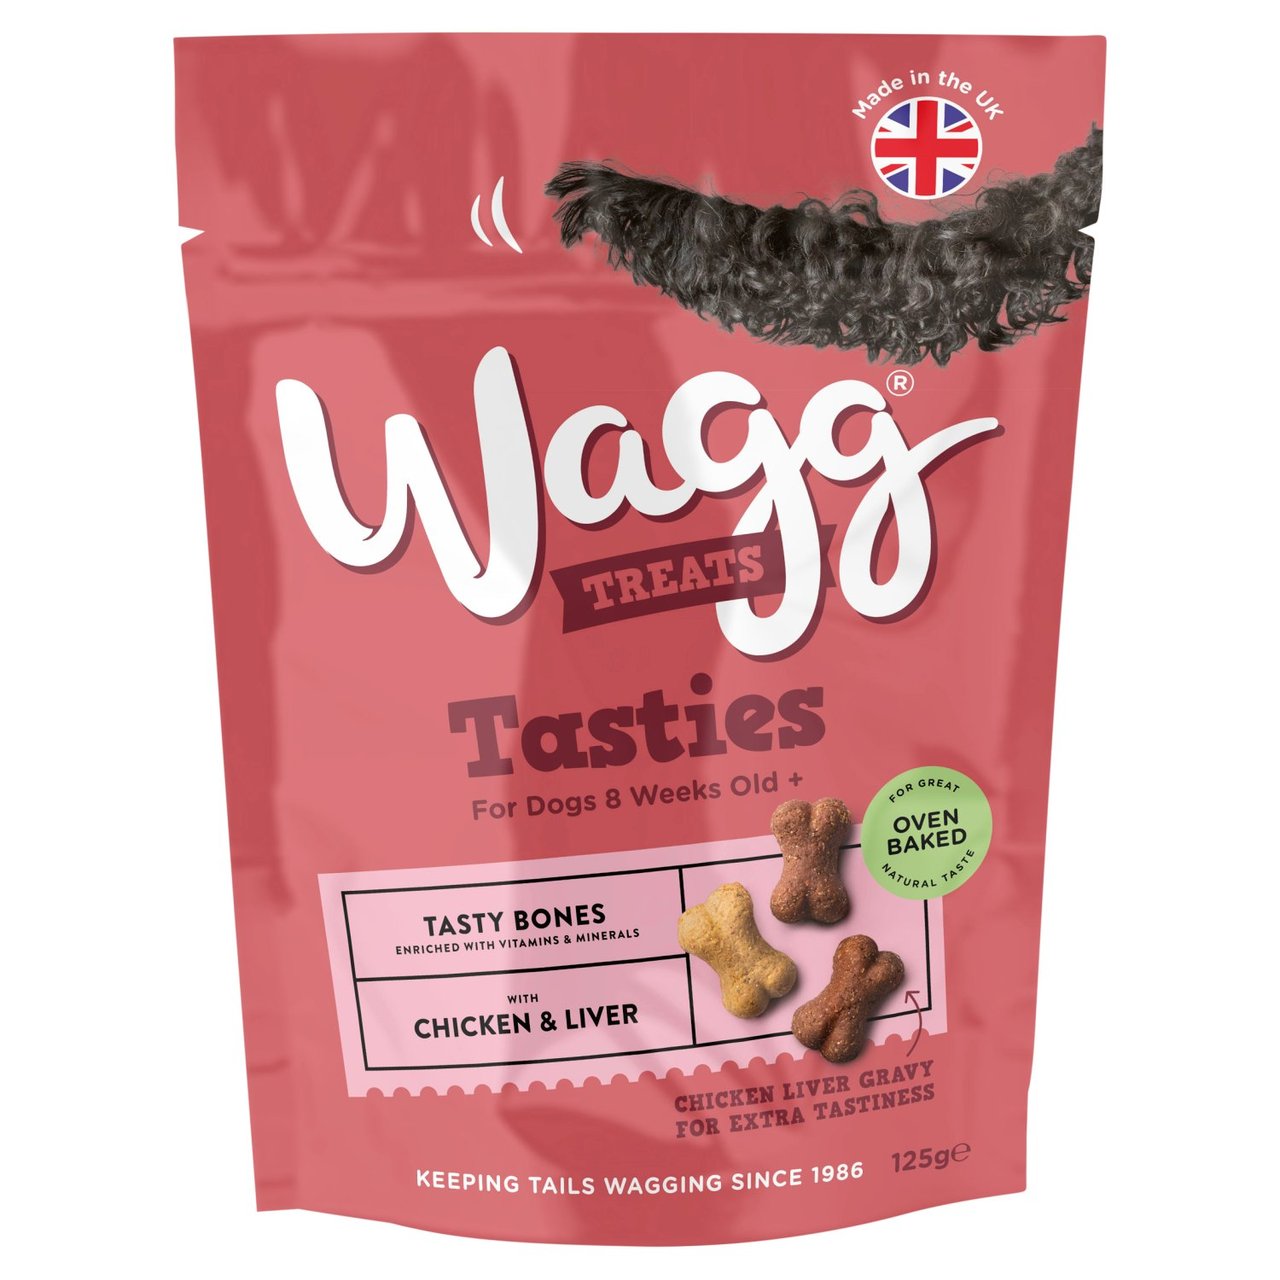 An image of Wagg Tasty Bones Treats with Chicken & Liver